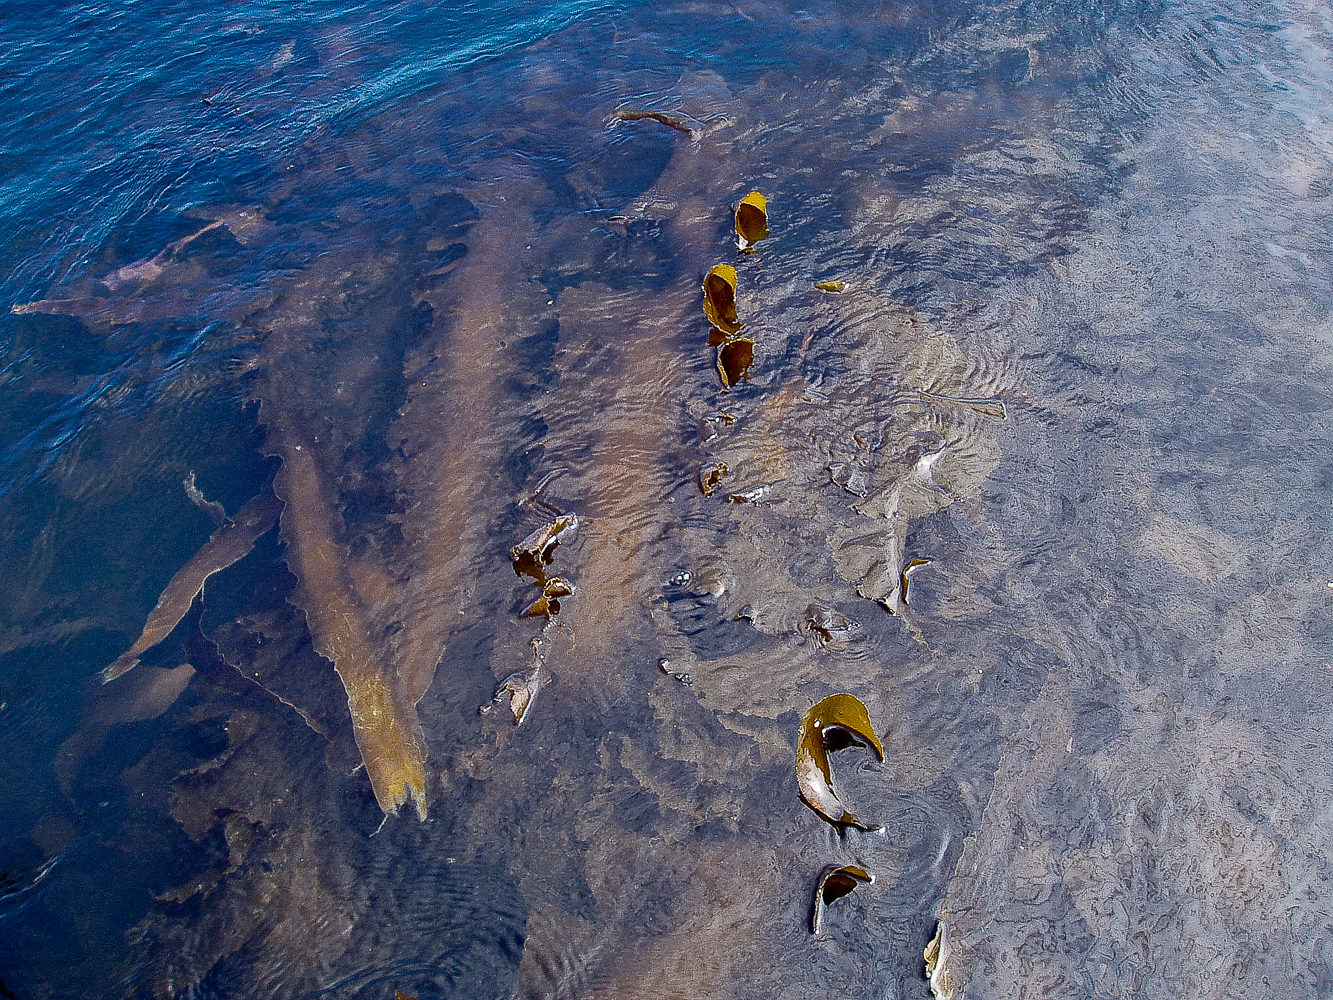 Kelp Bed Near the Surface at Dead Low Tide